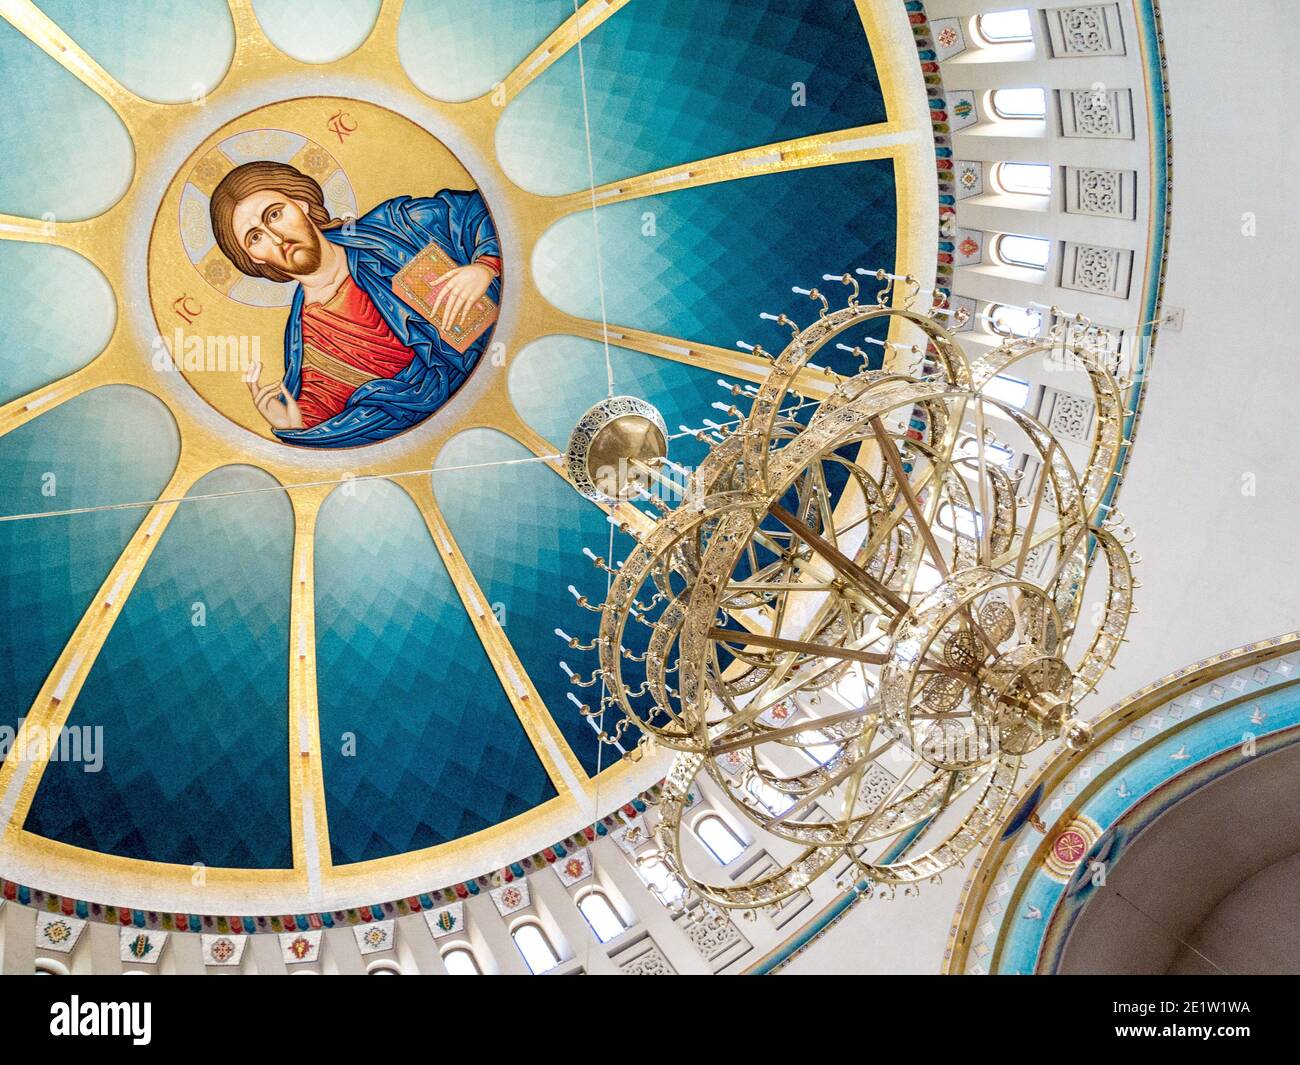 Ceiling painting of Jesus and large chandelier inside the Resurrection Cathedral, an Albanian Orthodox Church built in 2014 in Tirana, Albania Stock Photo